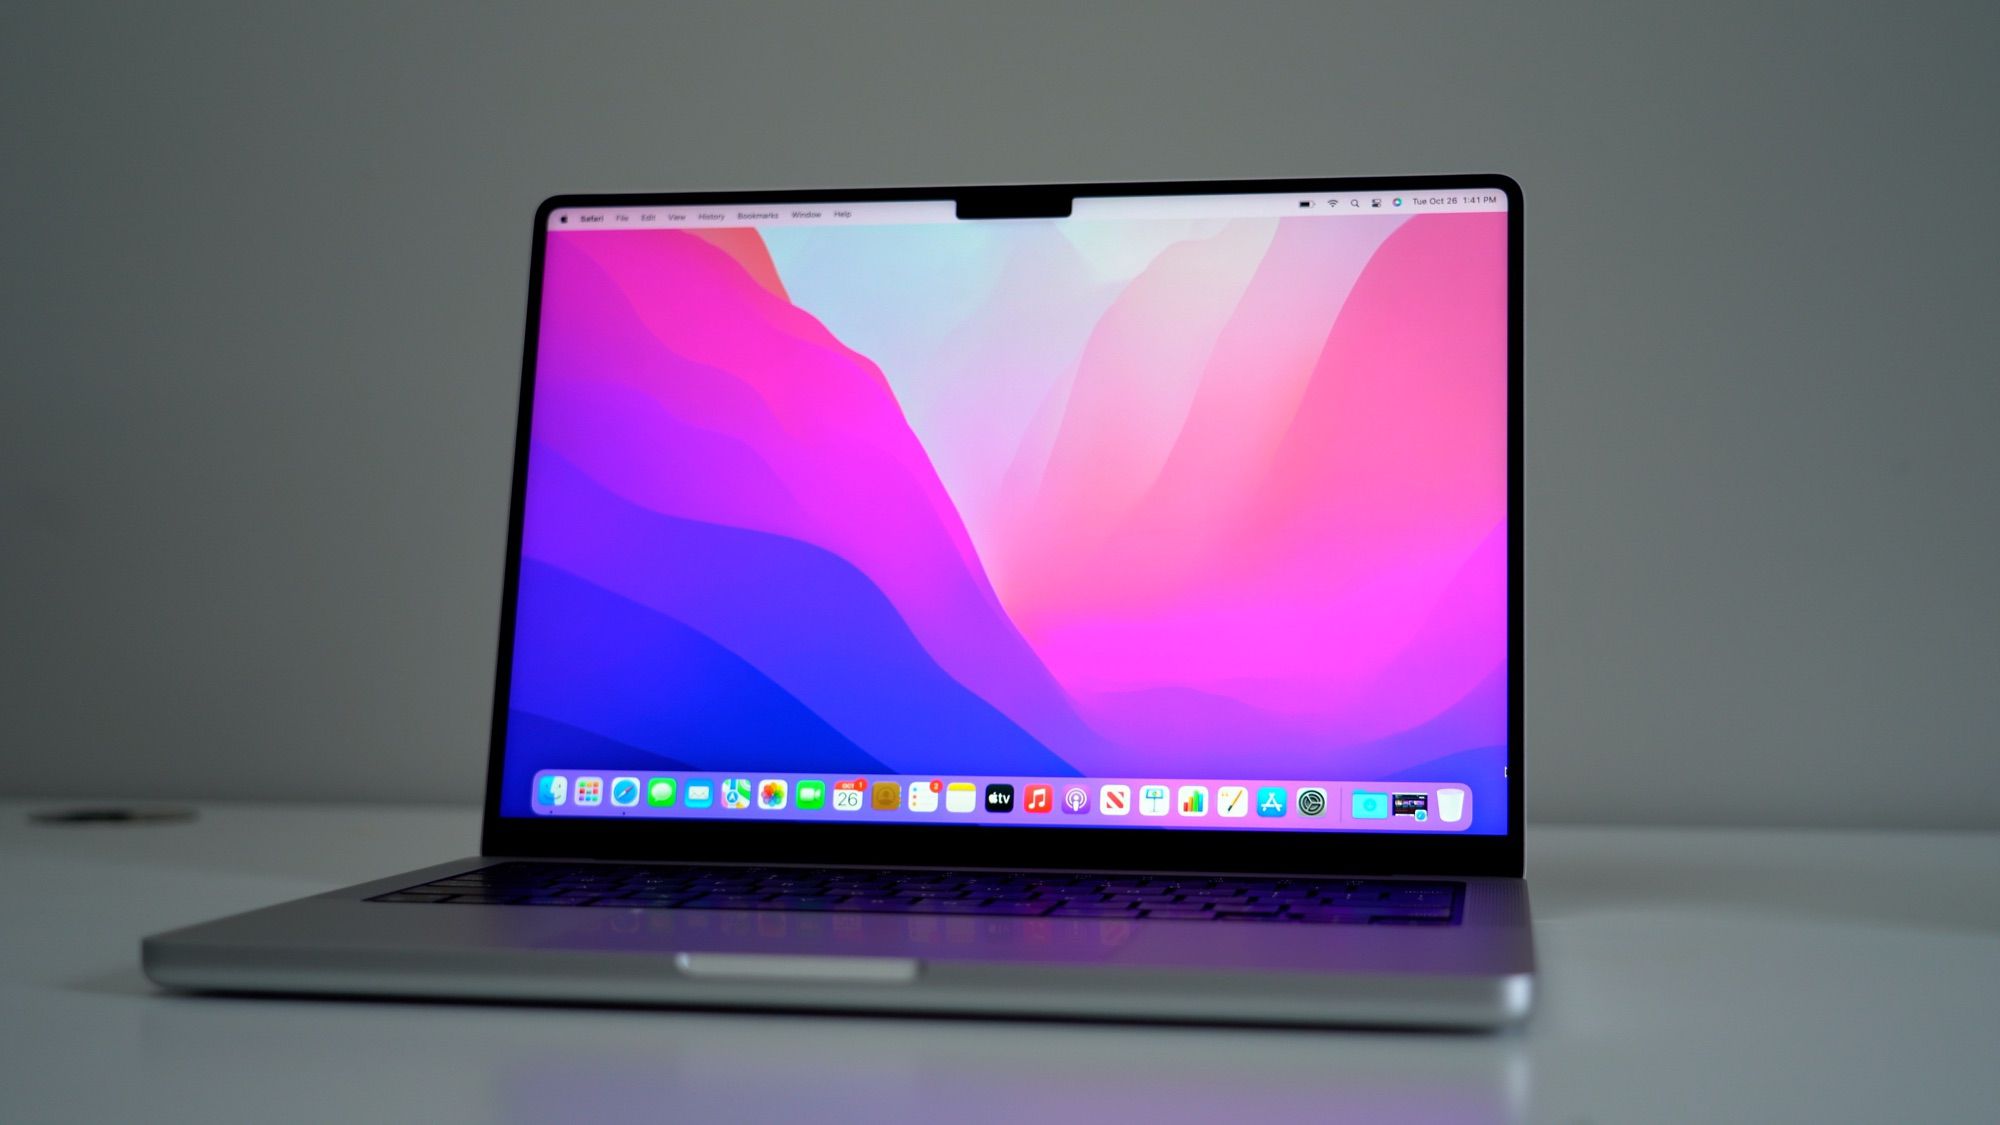 M1 Pro and M1 Max MacBook Pro Owners Complain of Crashes Playing HDR YouTube Videos – MacRumors